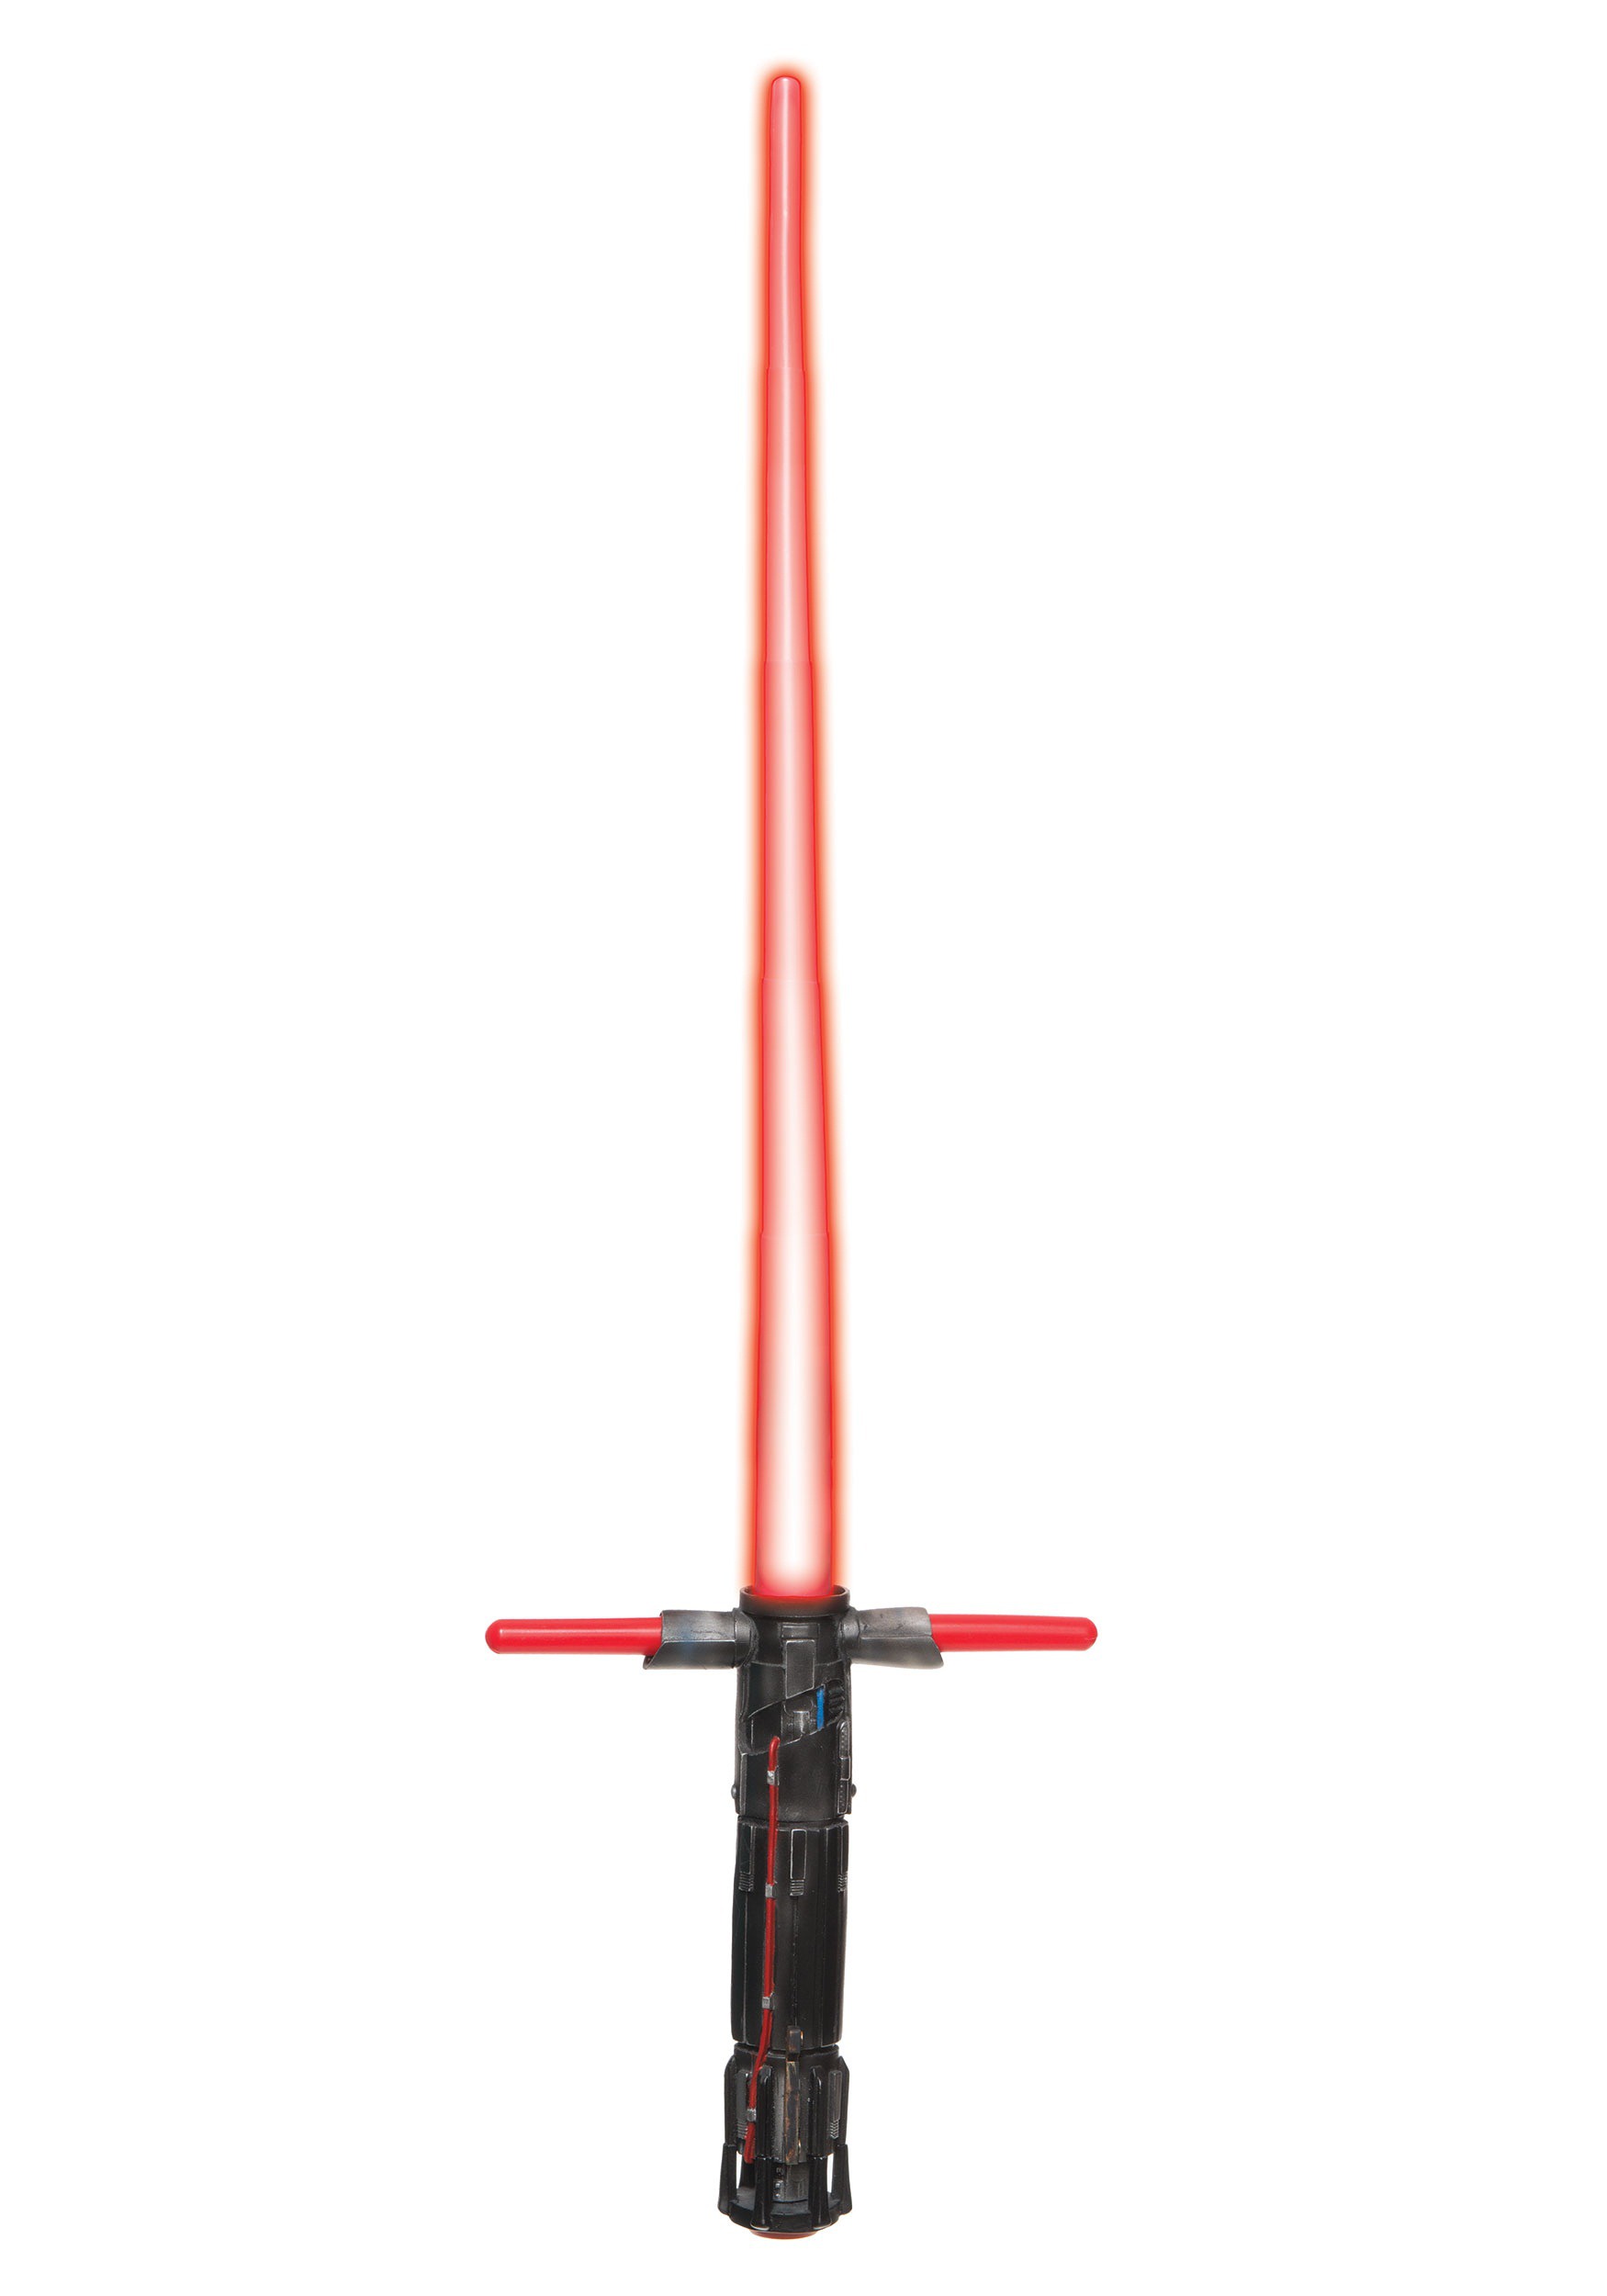 Star Wars The Force Awakens Kylo Ren Lightsaber Accesorio Multicolor Colombia